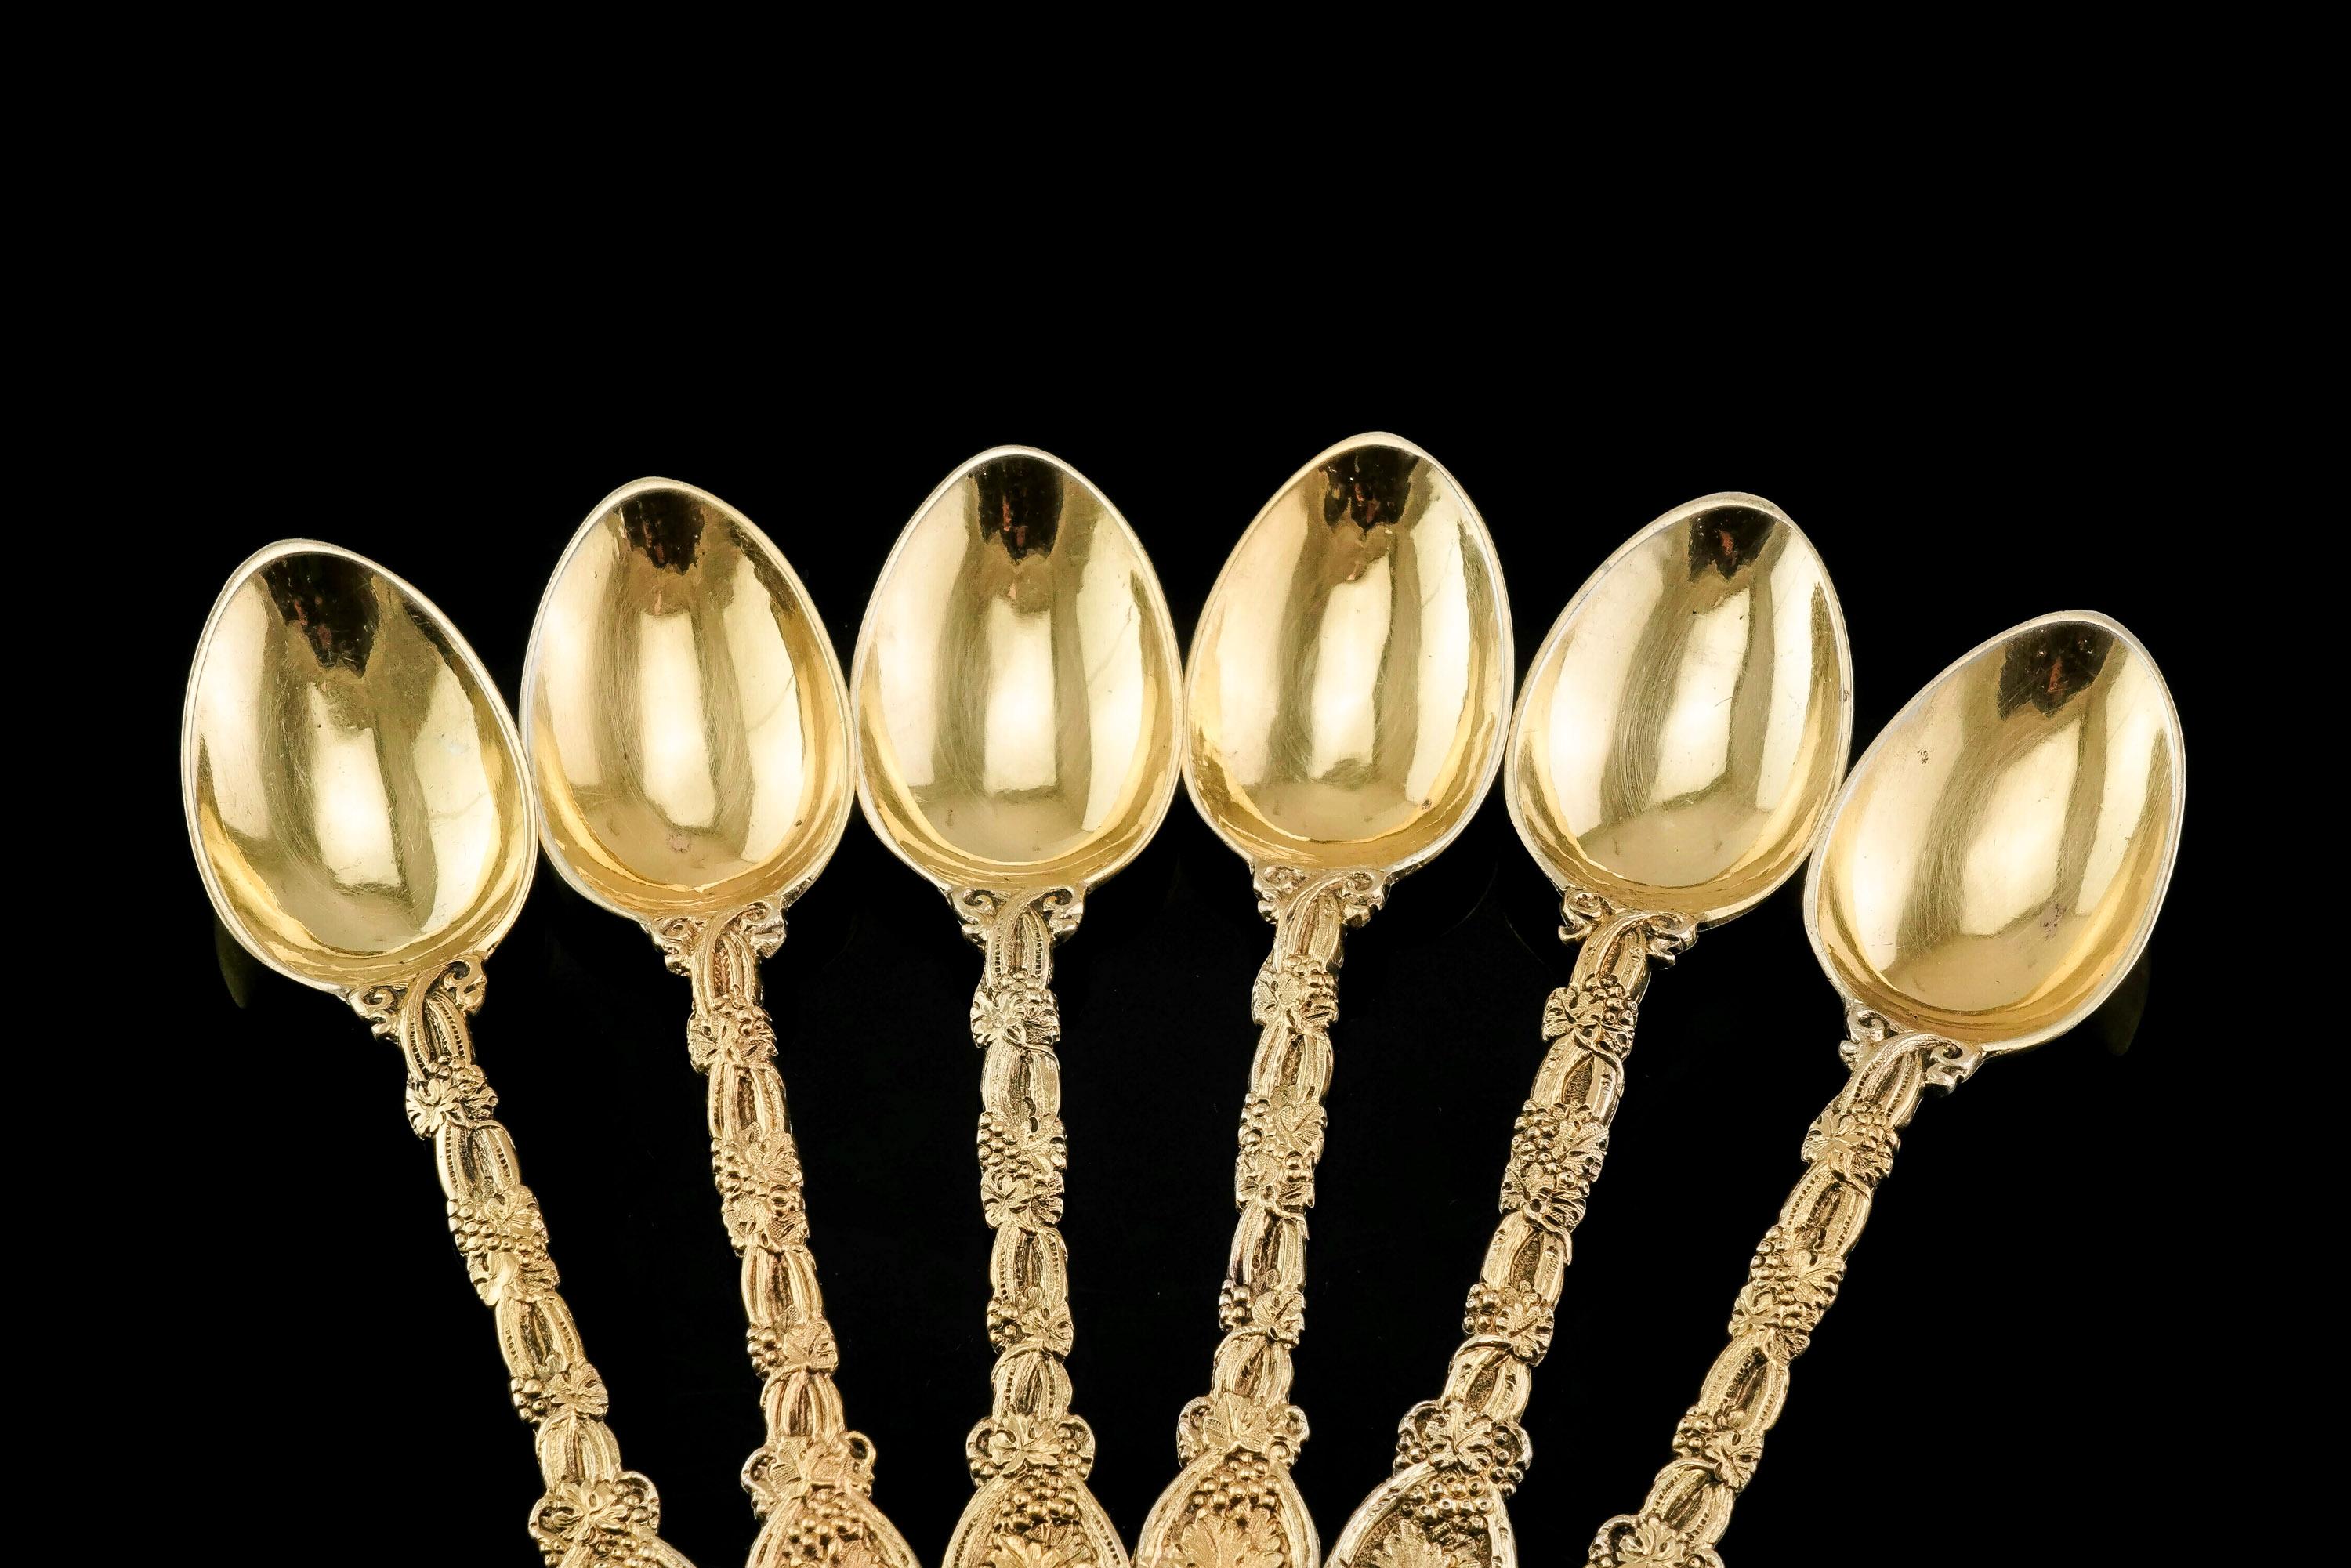 We are delighted to offer this magnificent set of Victorian silver gilt teaspoons made by Charles Boyton in London, 1883 (one spoon a year later in 1884, identical design).

This set of six spoons features a beautiful naturalistic vine handle